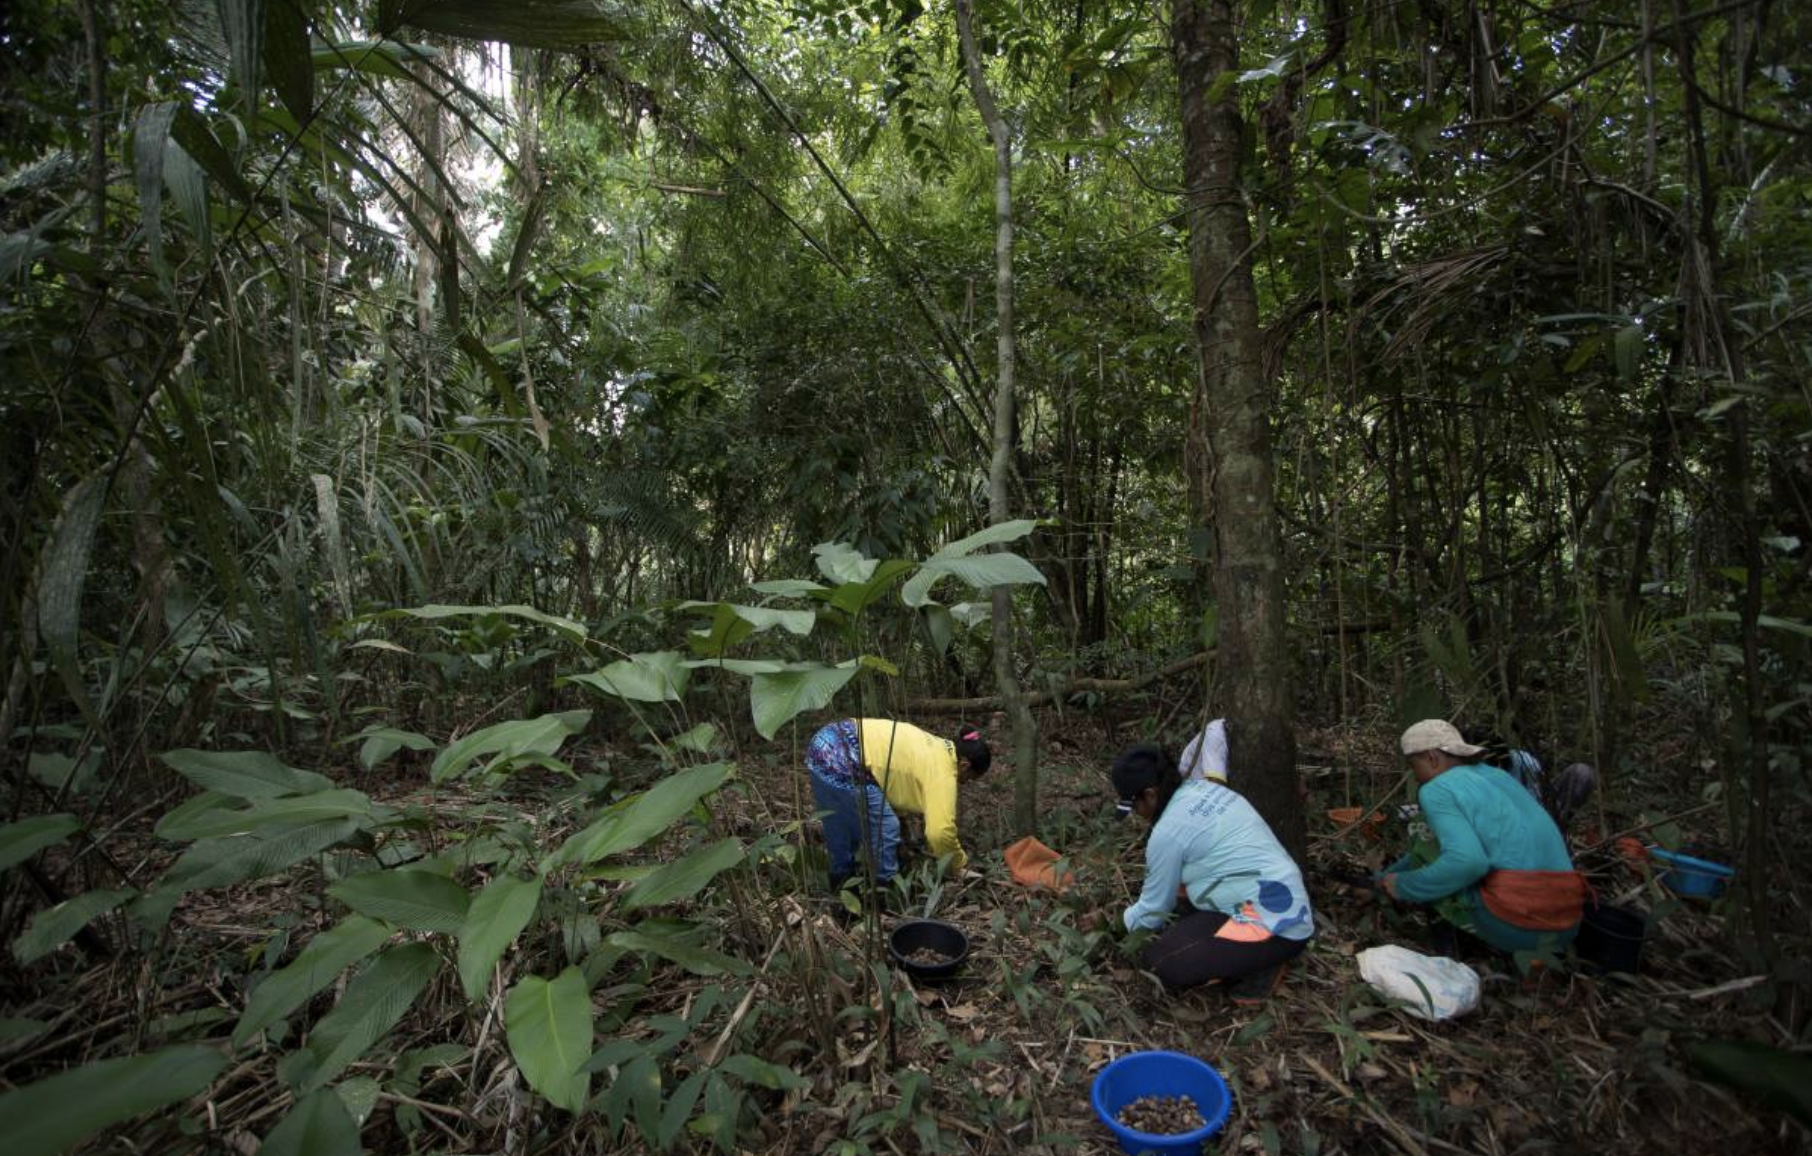 Reserve residents collect murumuru seeds in a preserved forest area in the Middle Juruá Extractive Reserve, Amazonas, Brazil, October 17, 2019. Image by Bruno Kelly/Thomson Reuters Foundation. Brazil, 2019.